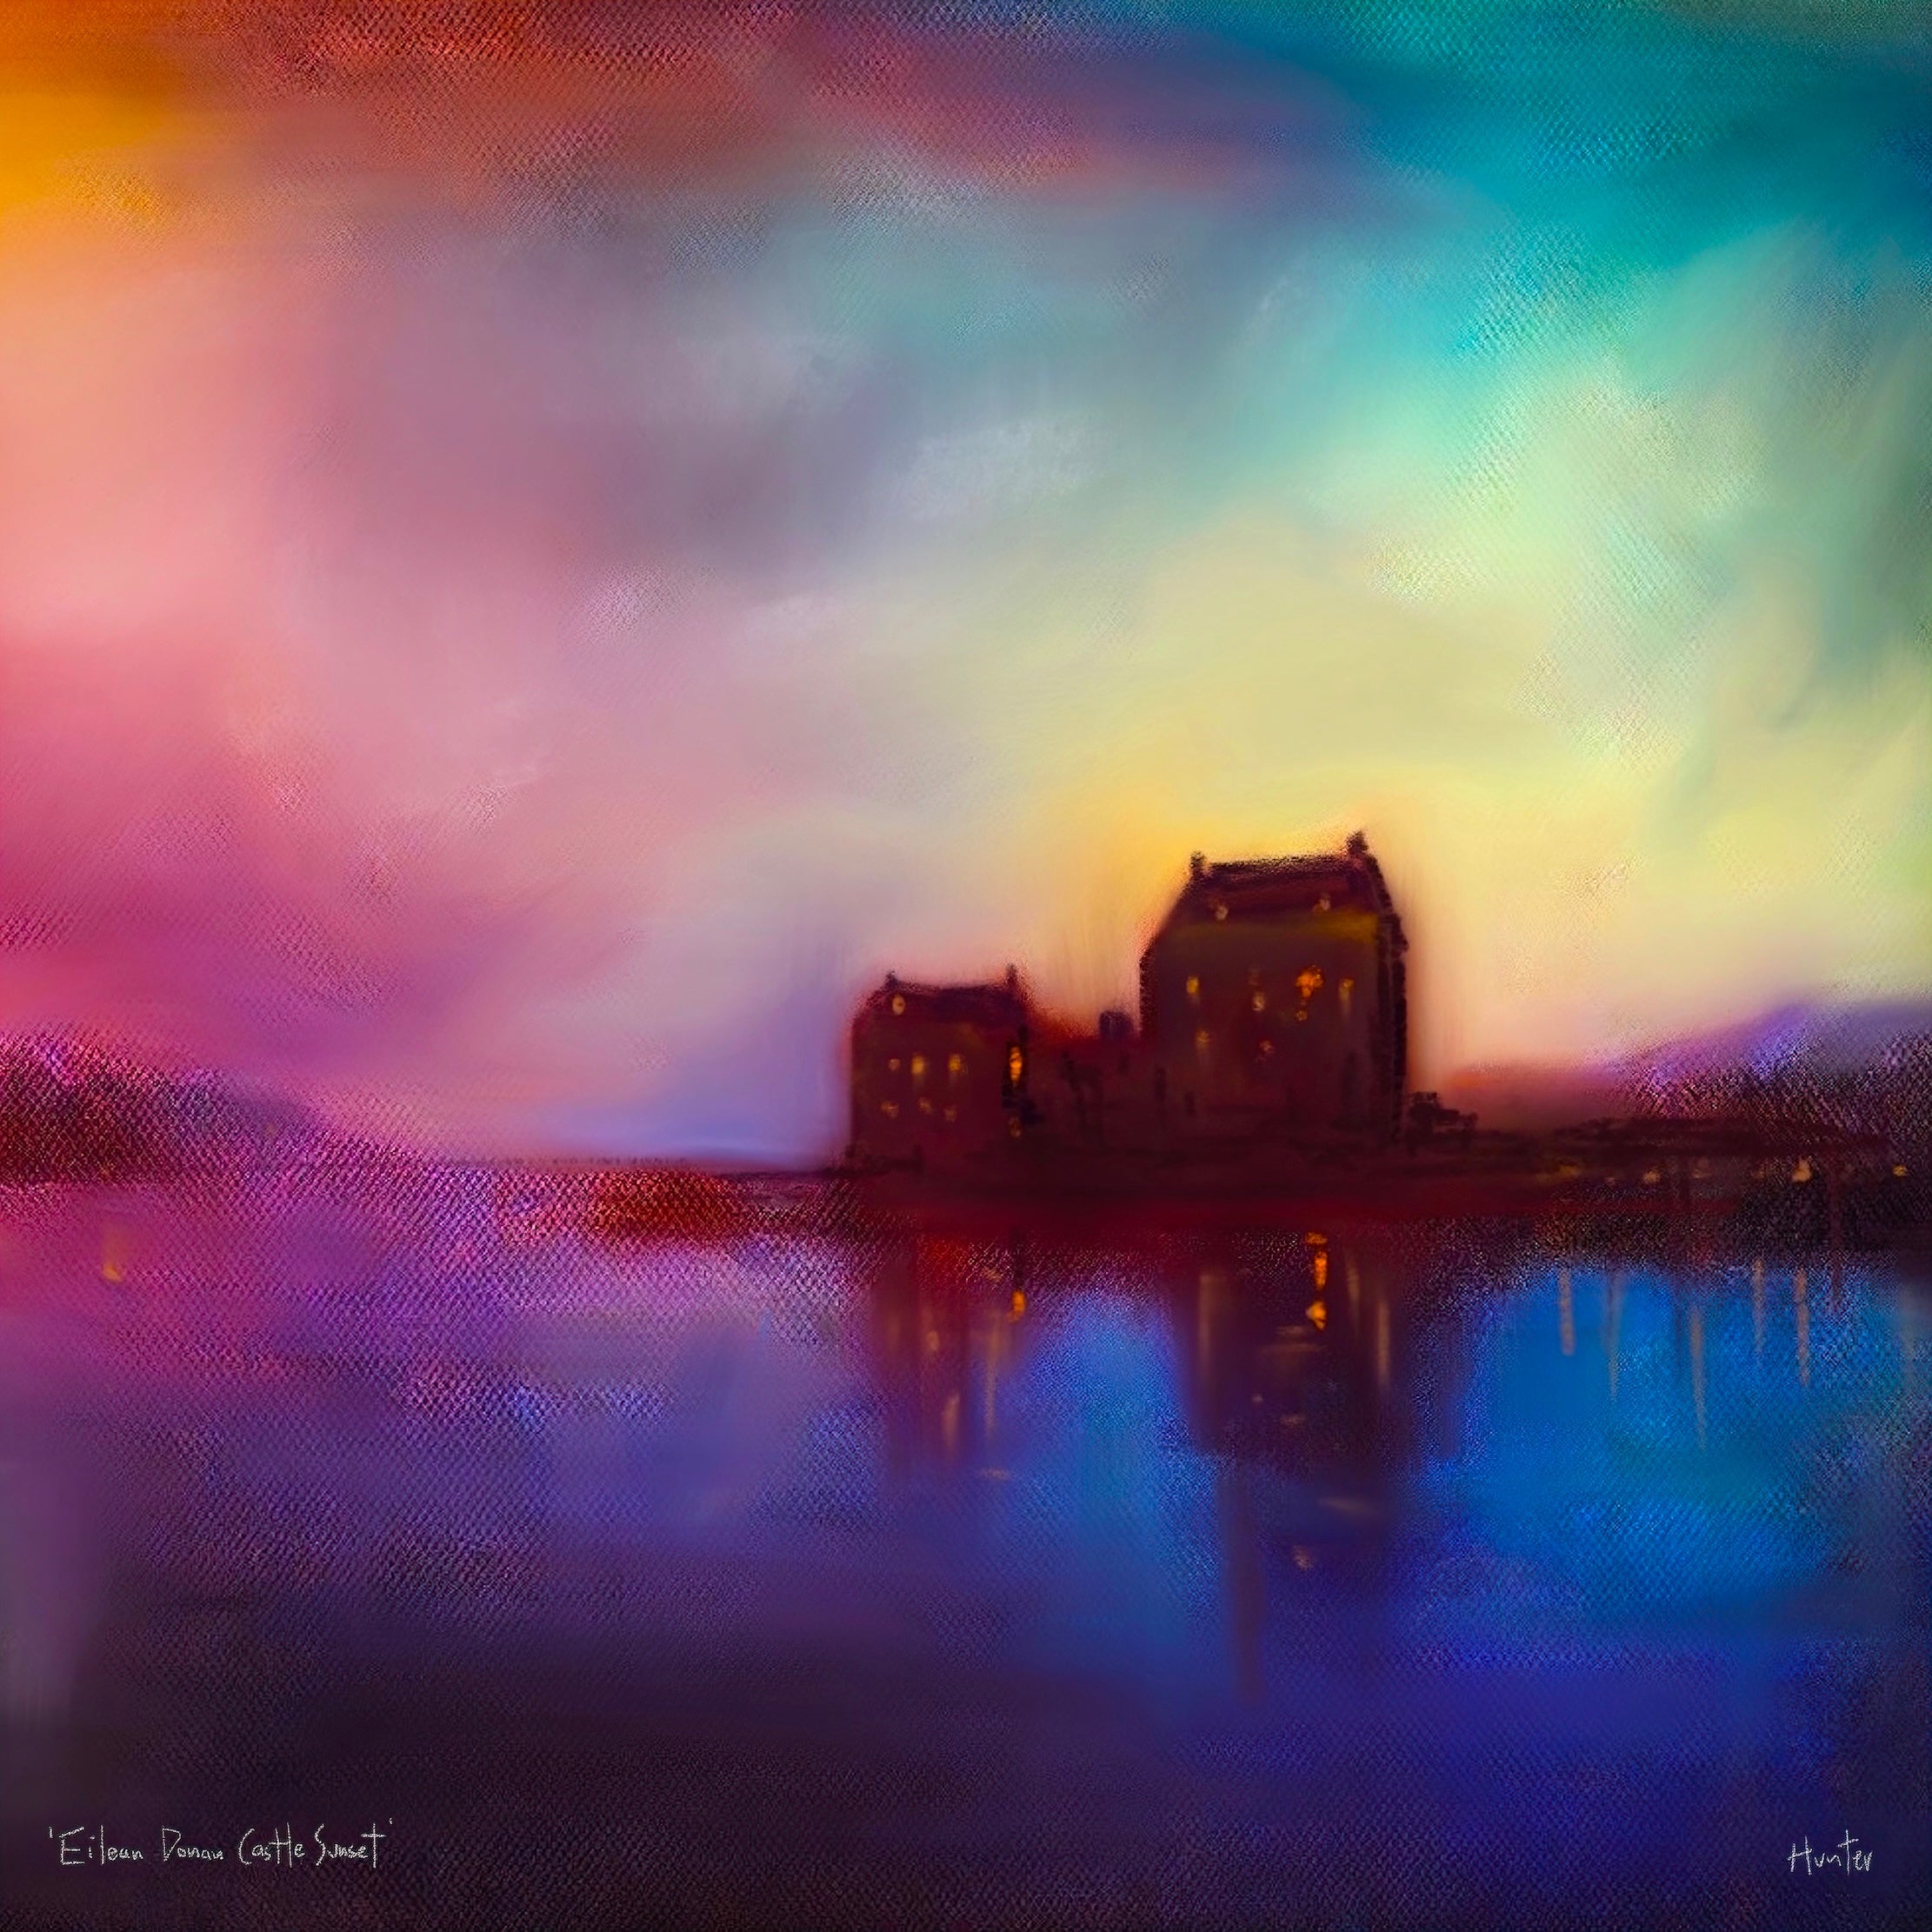 Eilean Donan Castle Sunset | Scotland In Your Pocket Art Print-Scotland In Your Pocket Framed Prints-Historic & Iconic Scotland Art Gallery-Mounted & Cello Bag: 12.5x12.5 cm-Black Frame-Paintings, Prints, Homeware, Art Gifts From Scotland By Scottish Artist Kevin Hunter